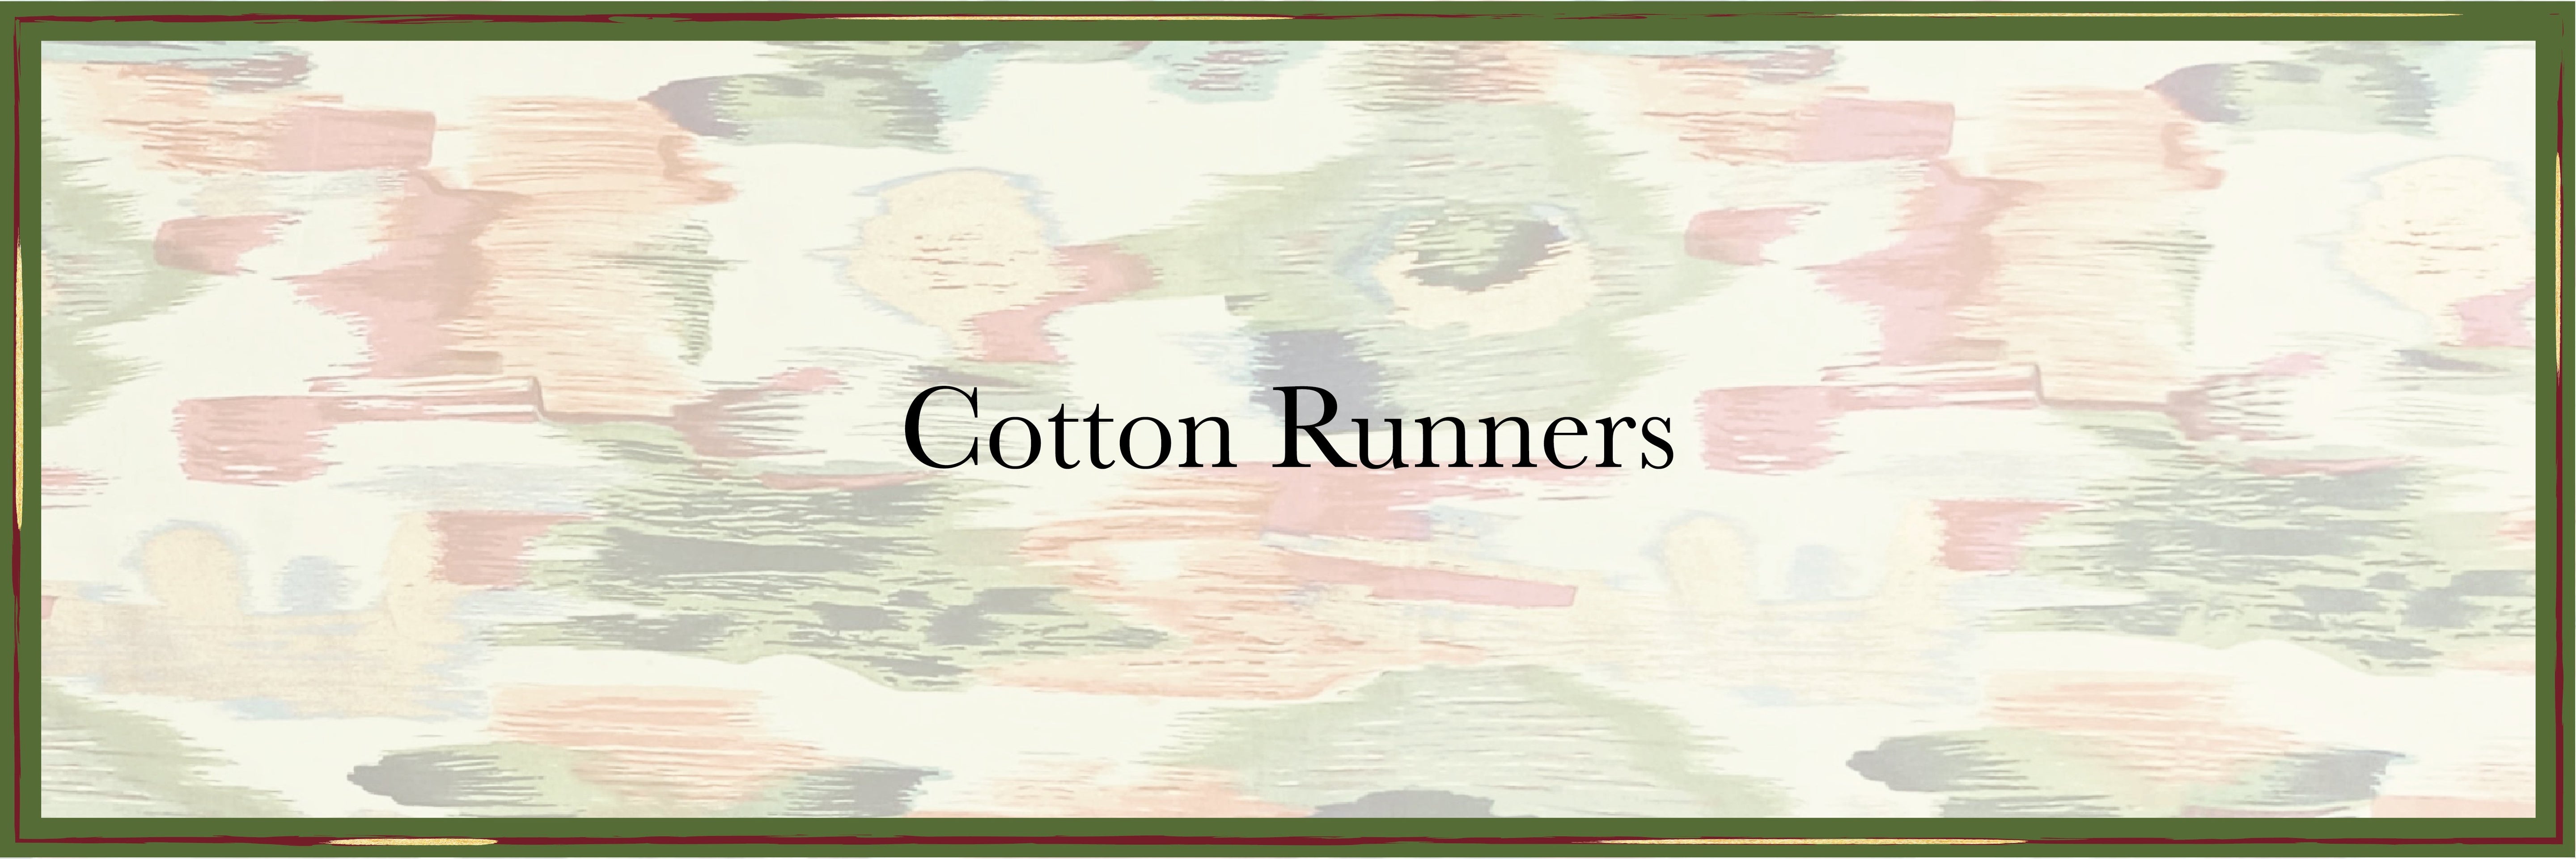 Cotton Runners